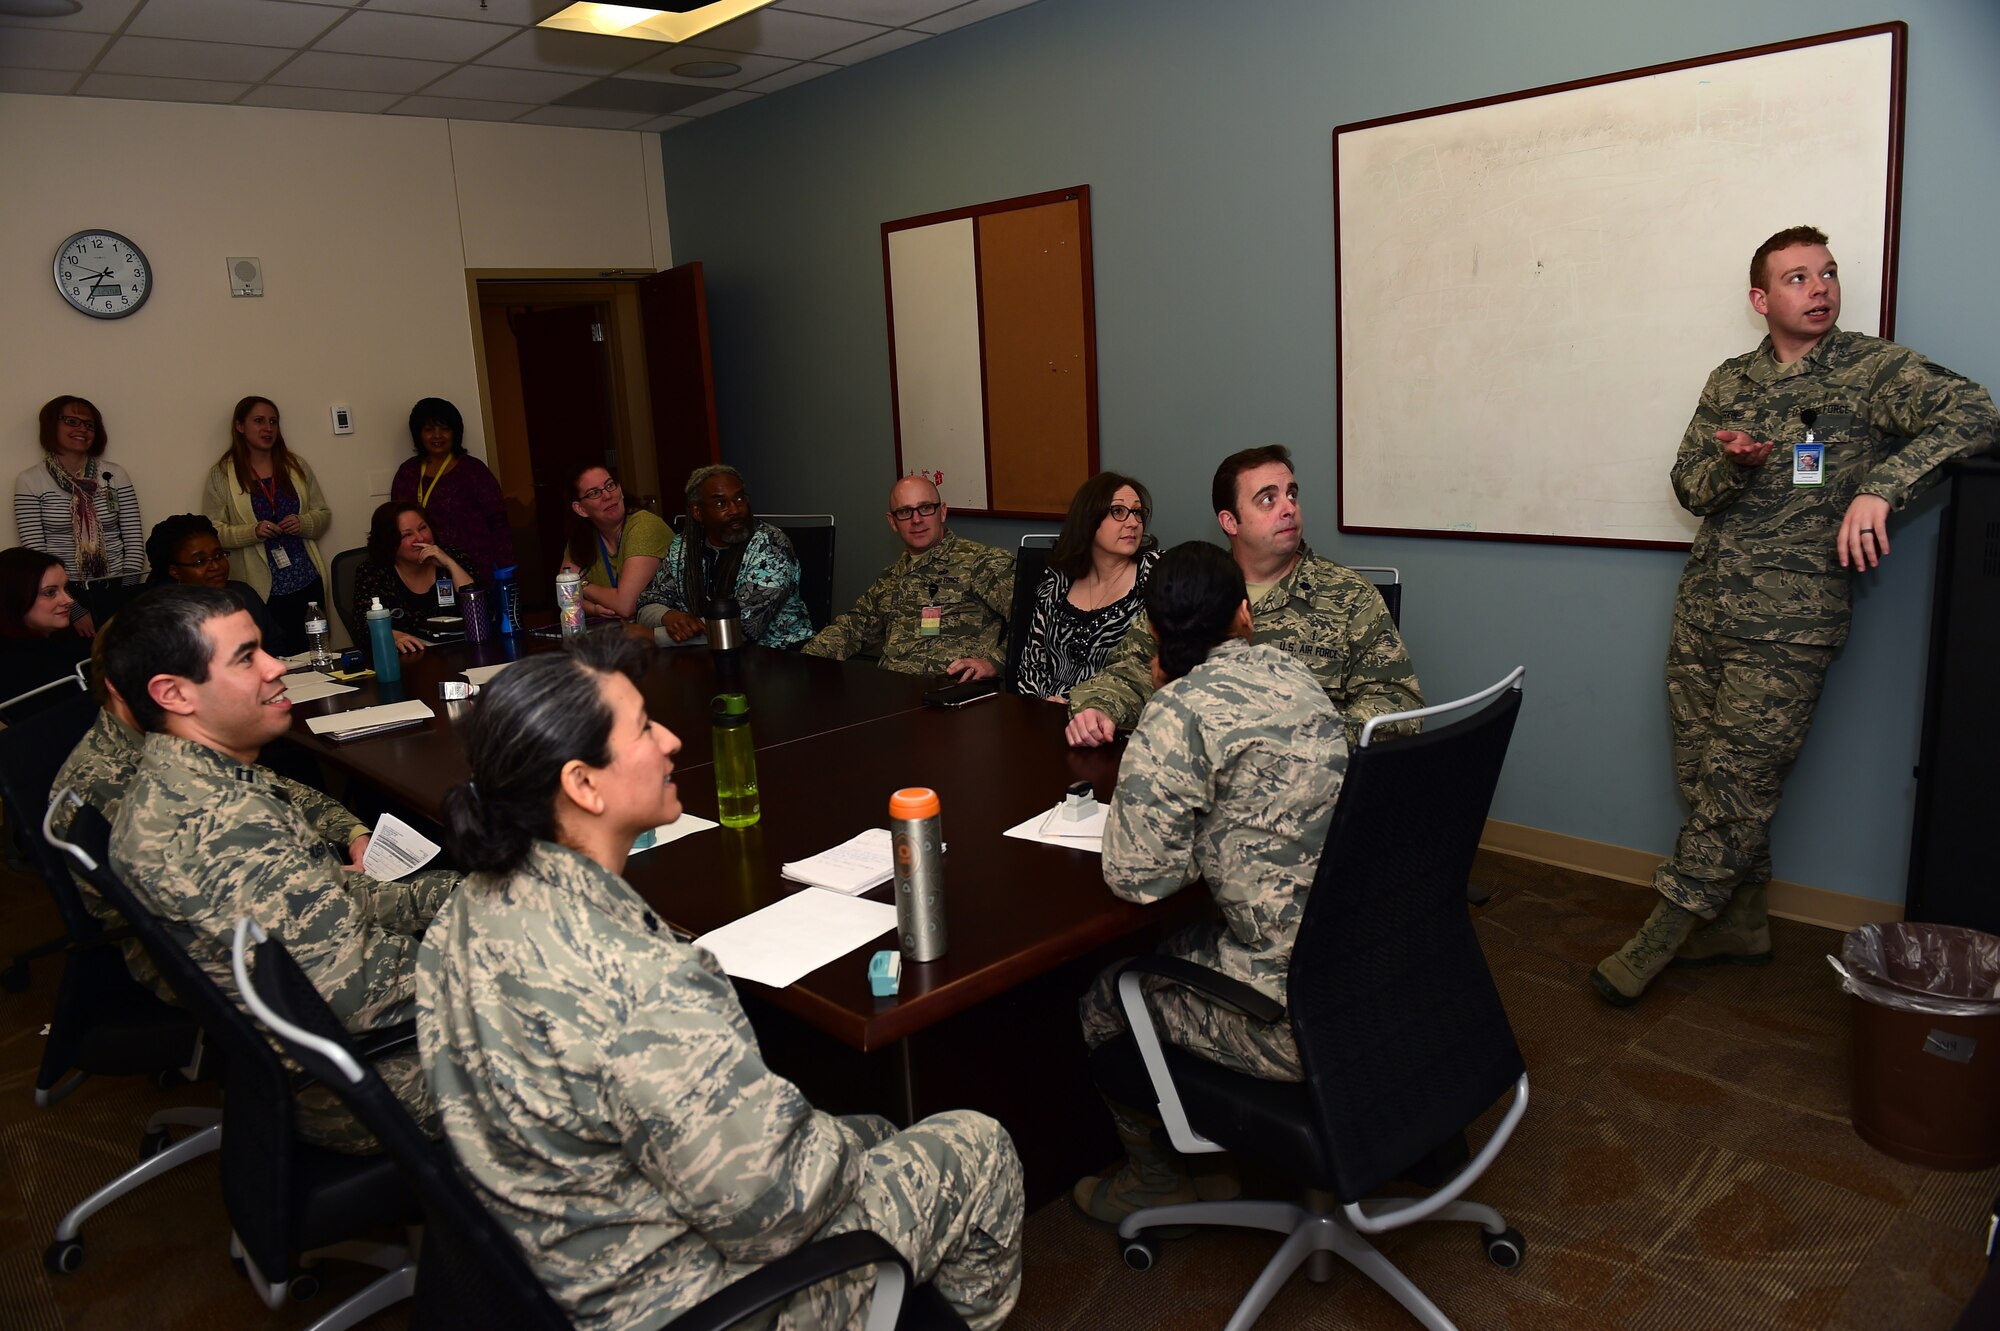 Staff Sgt. Christopher Durkin, 460th Medical Group Air Force Alcohol and Drug Abuse Prevention and Treatment NCO in charge, speaks to the 460th MDG mental health officers Jan. 24, 2017, at the Veterans Affairs Joint Venture Buckley Clinic in Aurora, Colo. Twice a week the mental health officers, many of which are part of the Biomedical Sciences Corps, come together to discuss patient care. (U.S. Air Force photo by Airman 1st Class Gabrielle Spradling/Released)